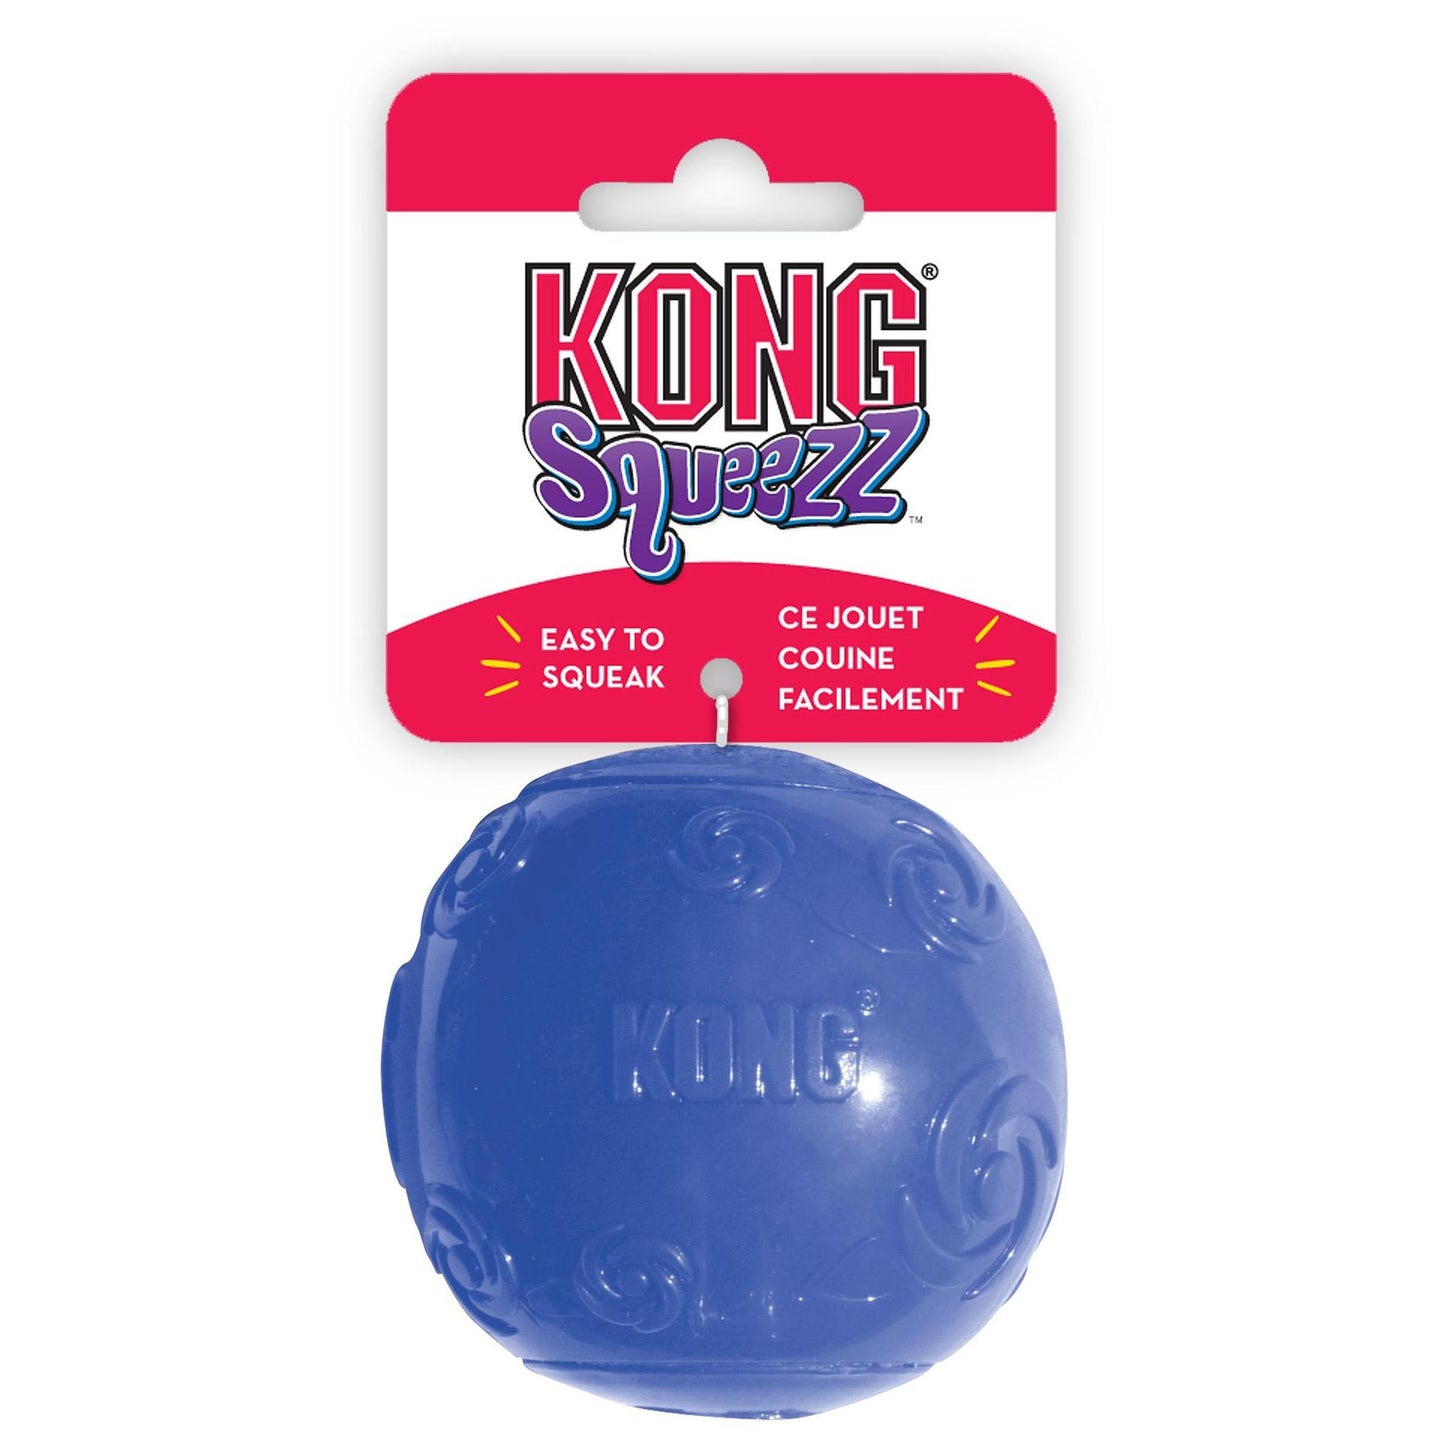 KONG Squeezz Ball Dog Toy - Assorted Colours